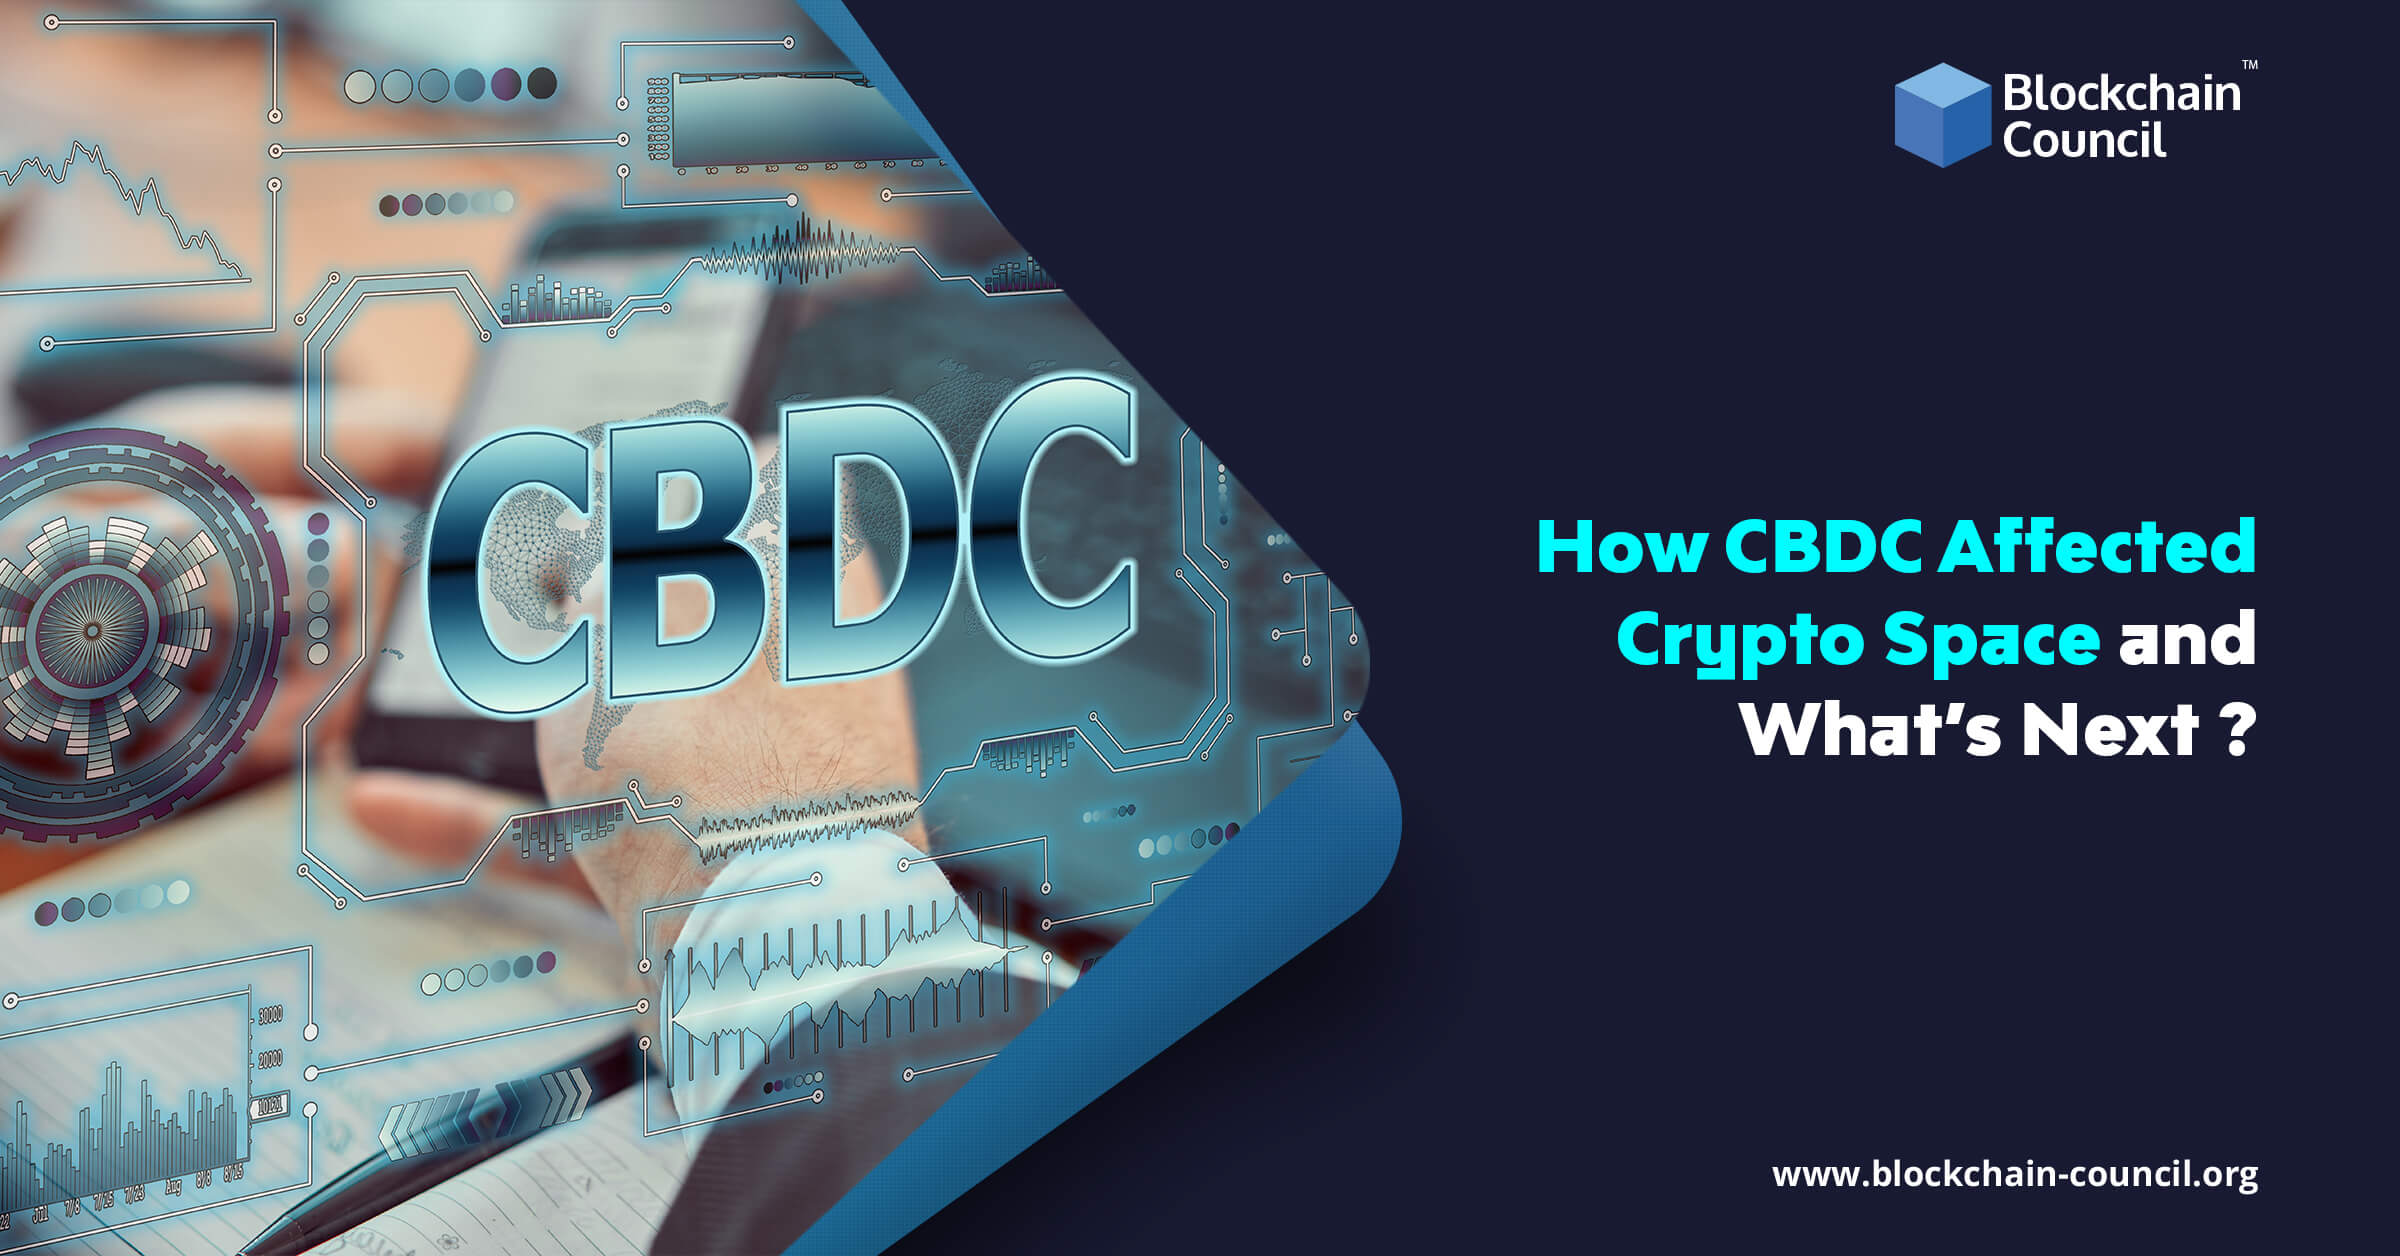 How CBDC Affected Crypto Space and What’s Next?